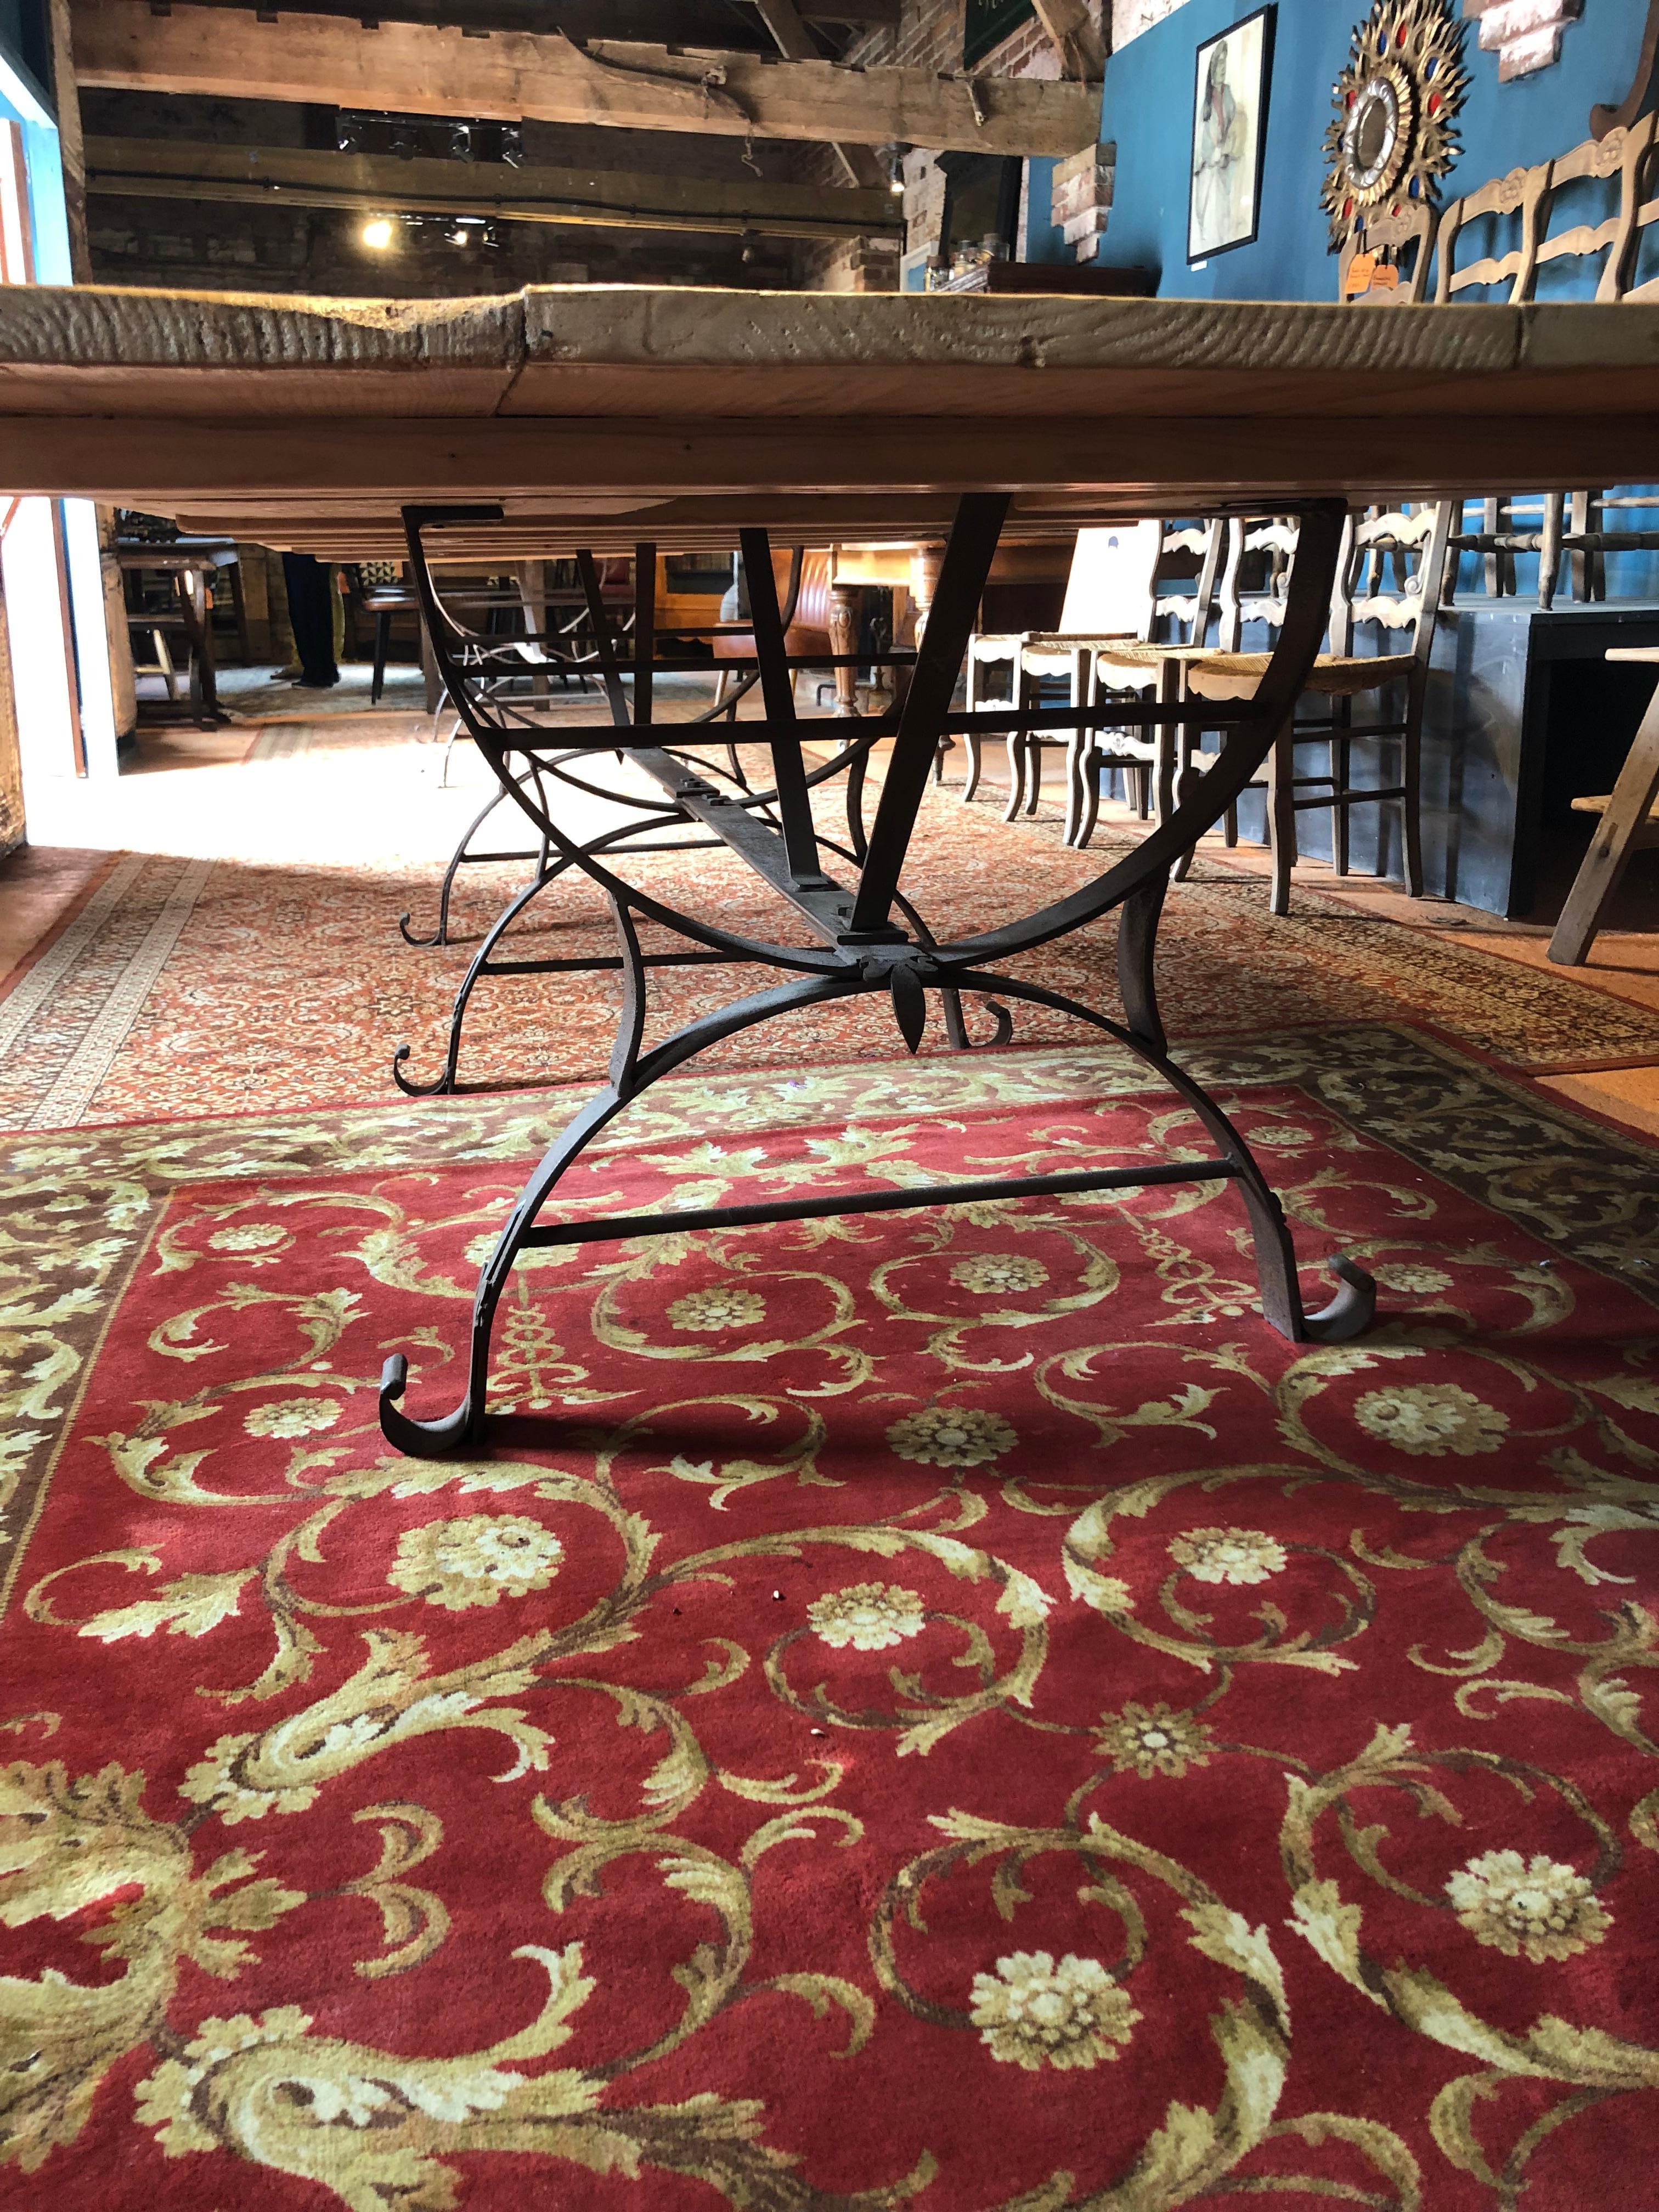 A very large rustic midcentury Dutch pine dining table with a handmade iron base with fleur-de-lys decoration.

This tabletop was taken from an old Gouda cheese factory in Holland. One can still see where the Wheels of Cheese were left to age. The